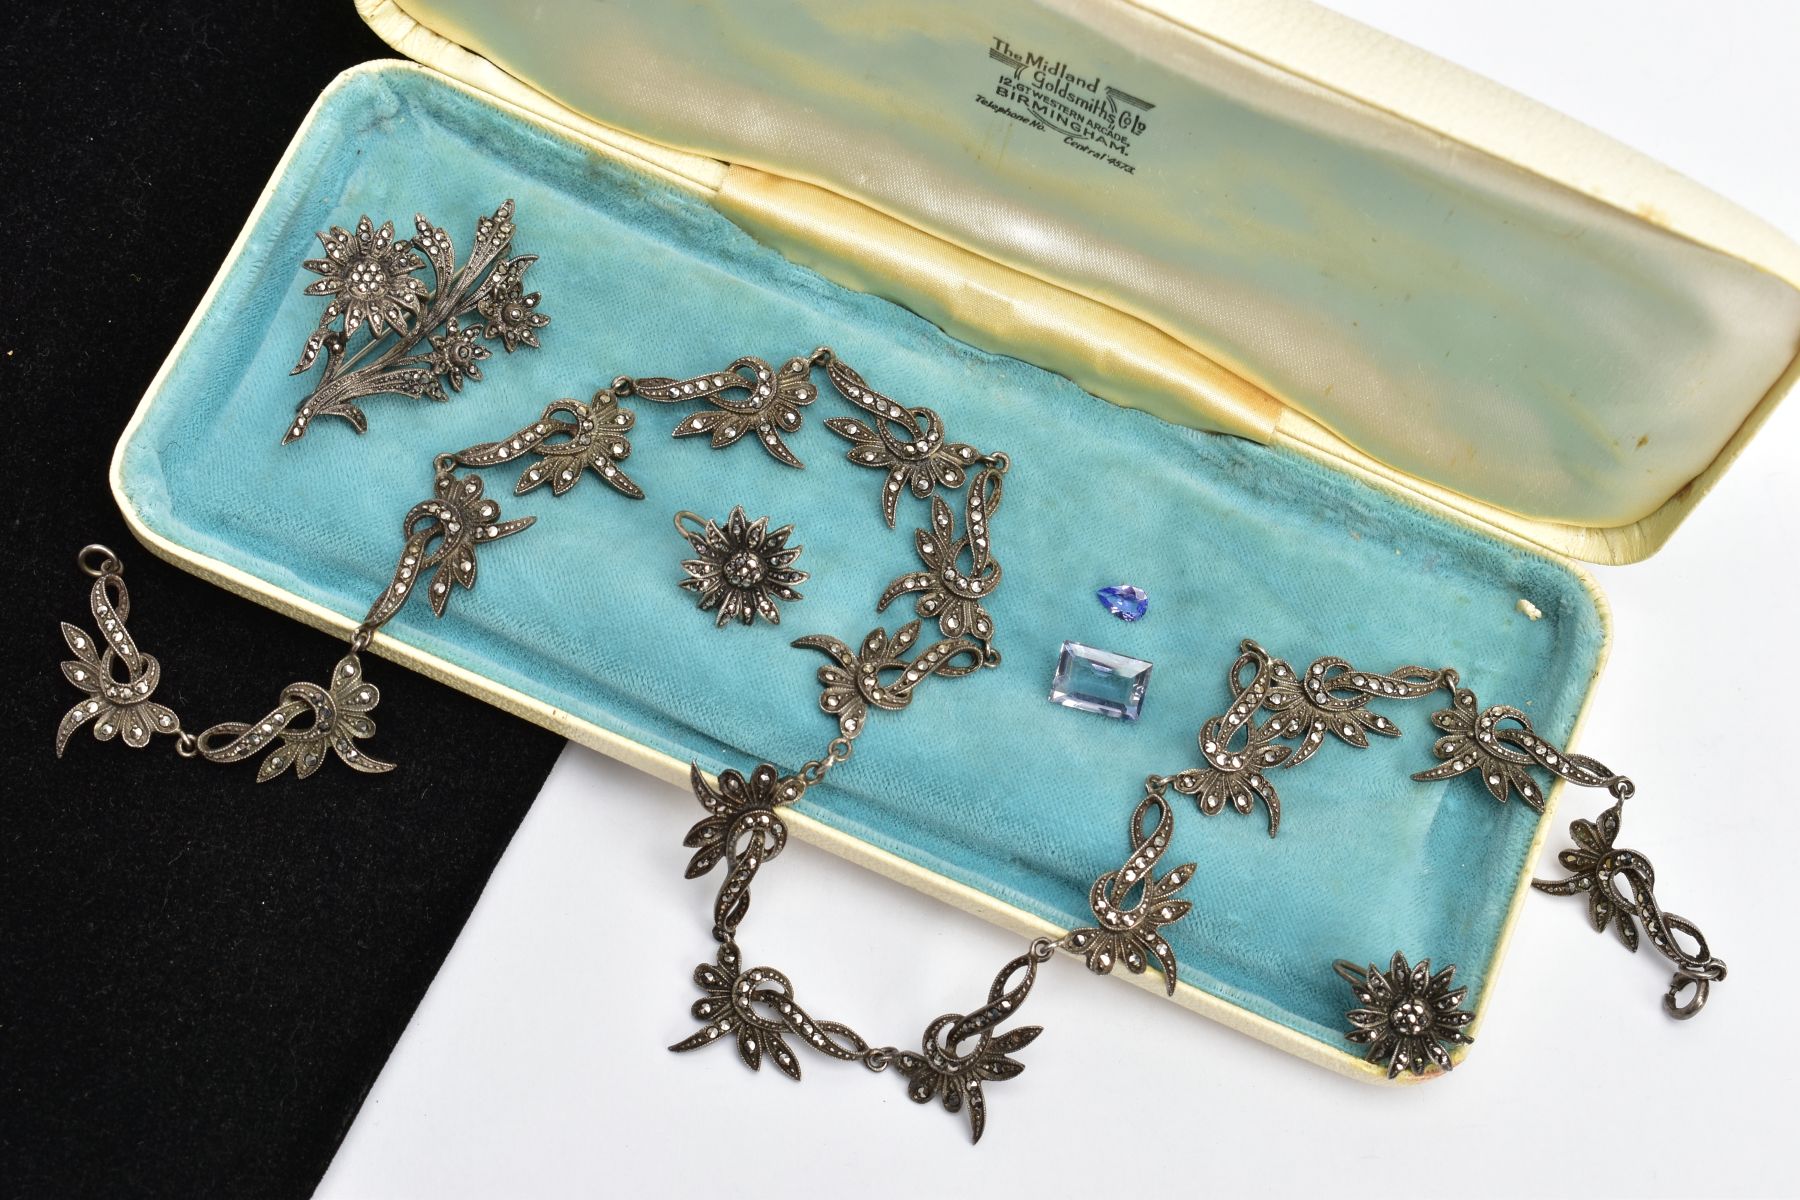 A WHITE METAL MARCASITE NECKLACE, EARRINGS AND A BROOCH, the necklace designed with sixteen floral